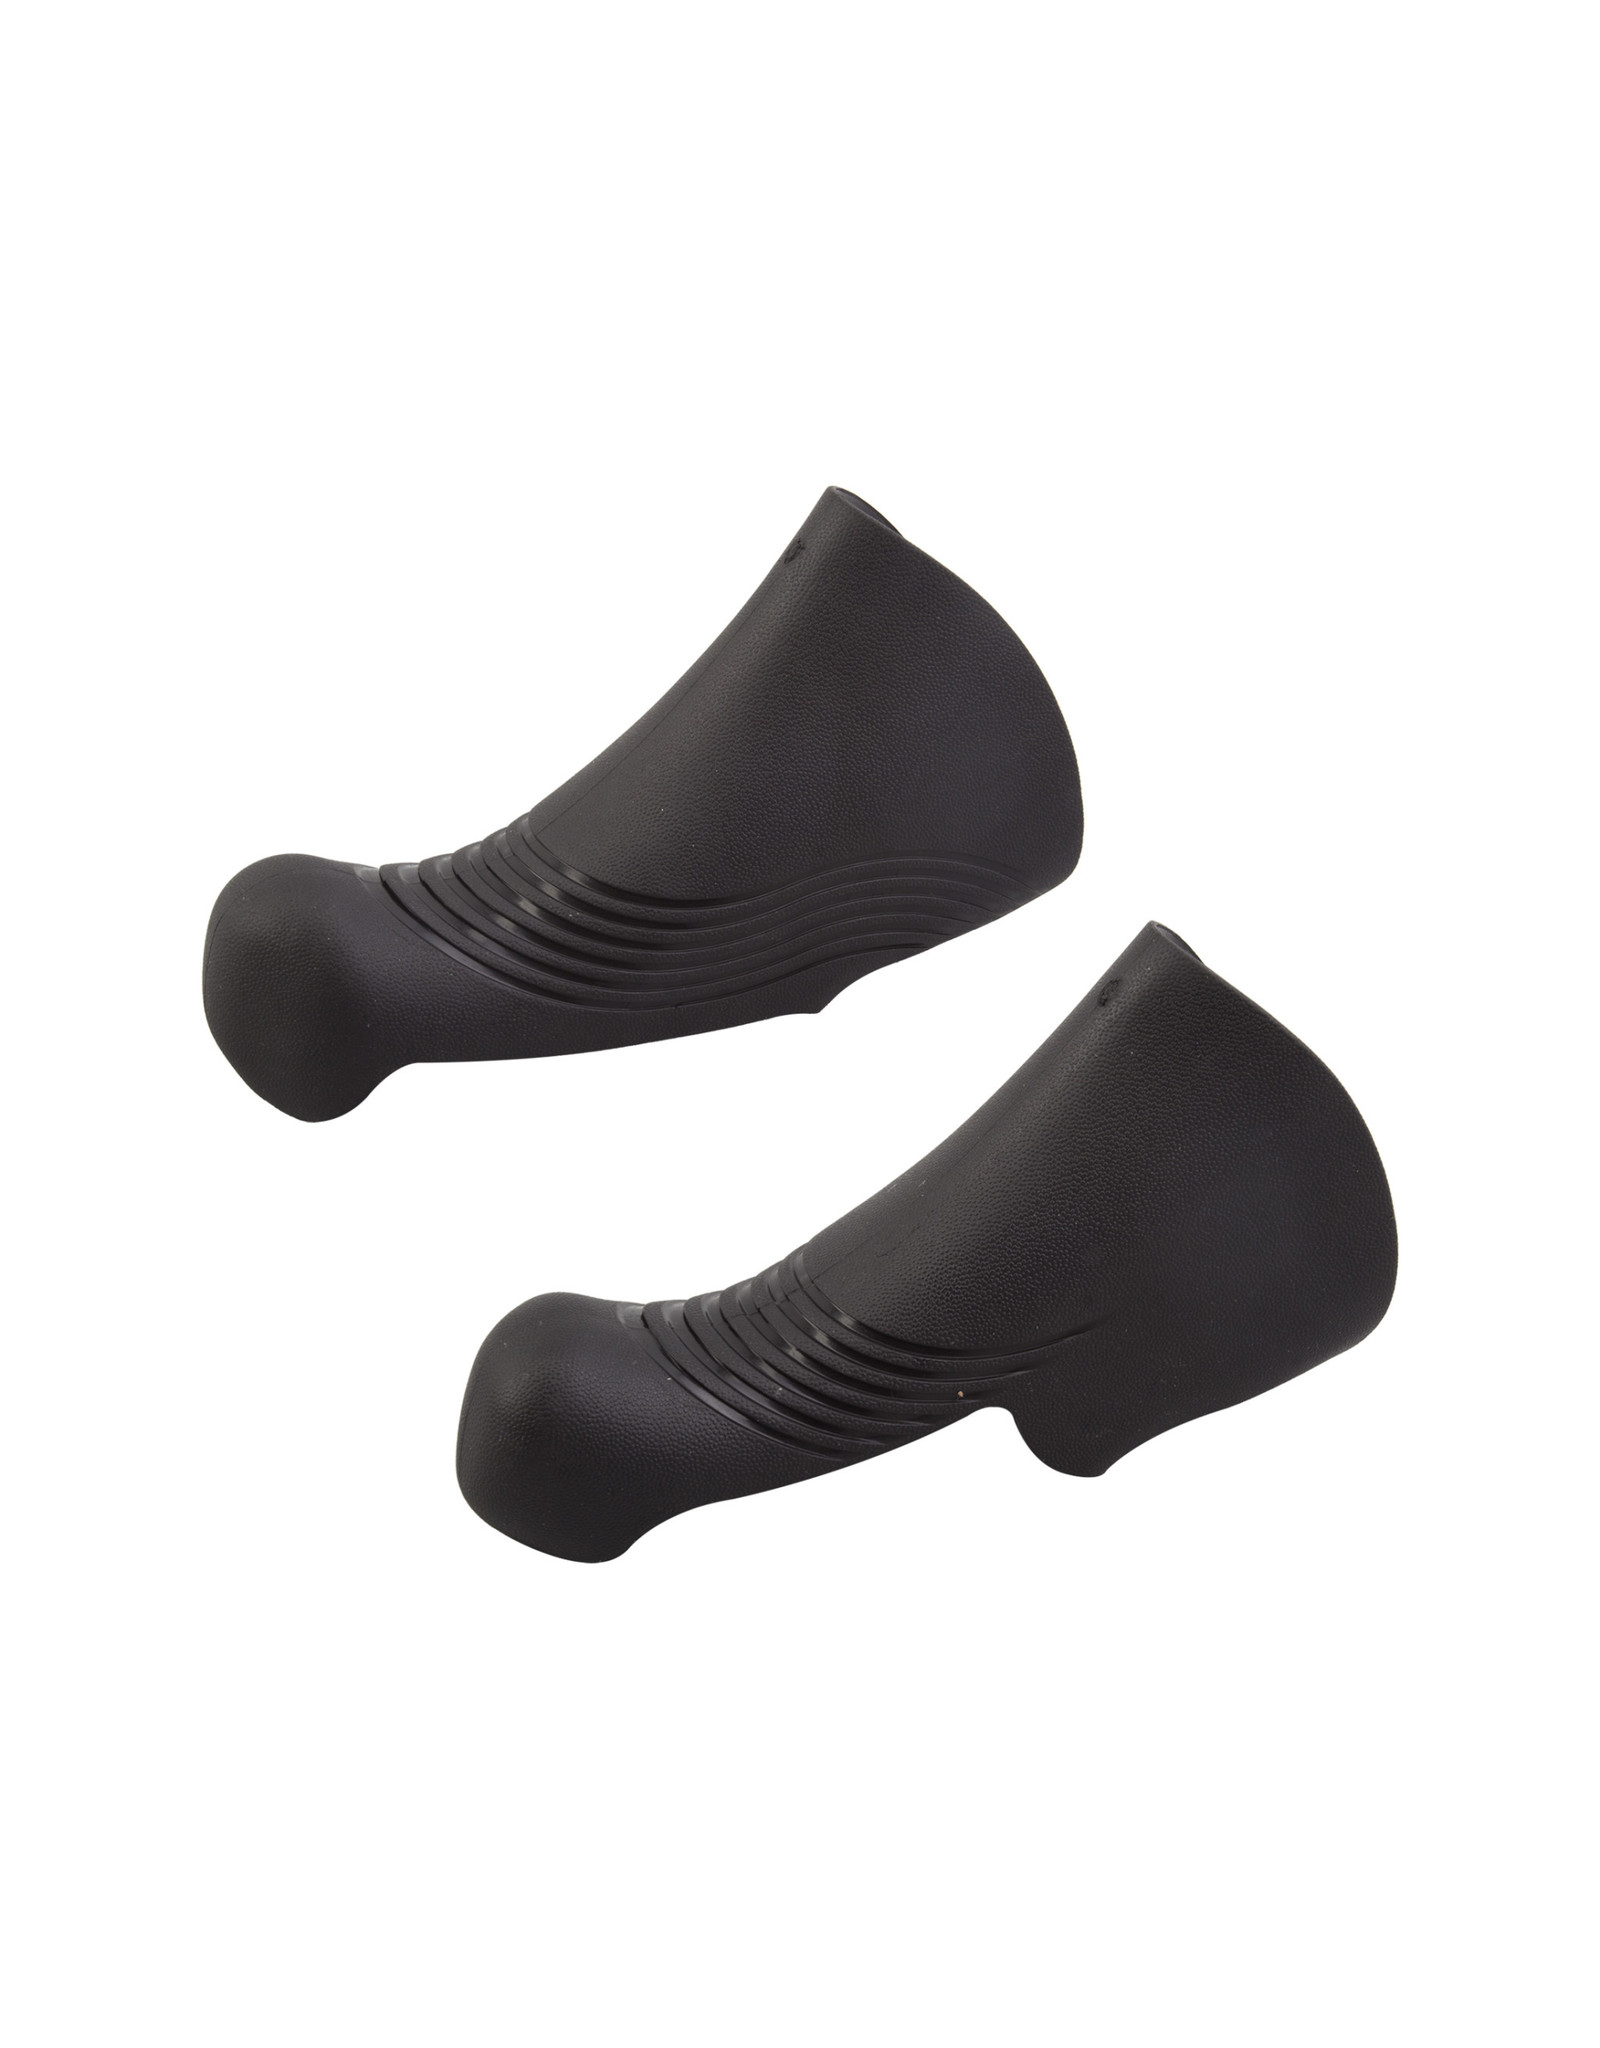 TRP TRP Replacement Hoods for RRL Levers, Black, Pair